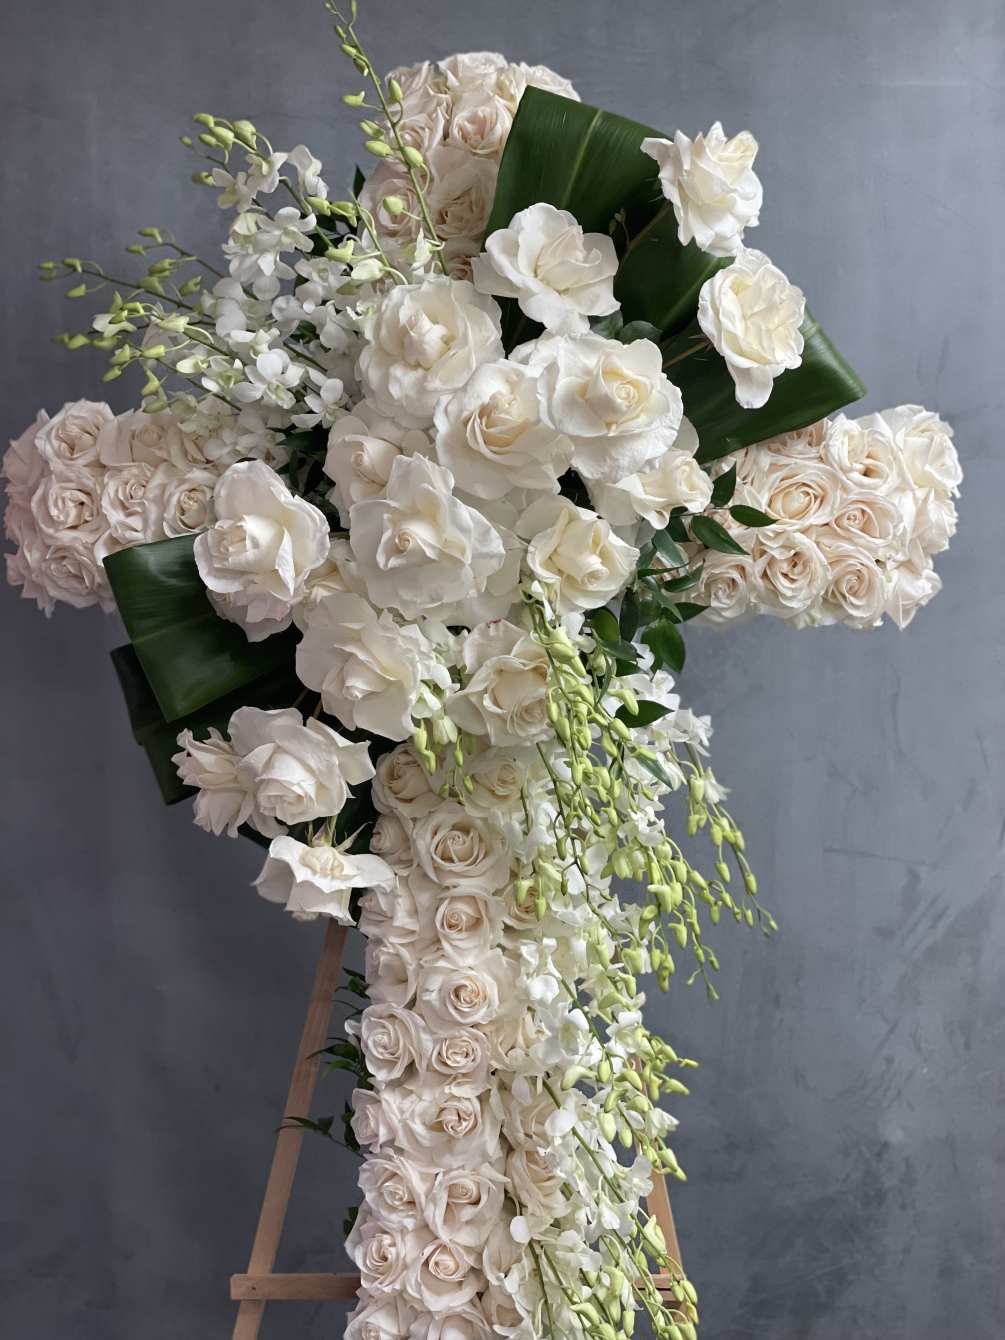 Cross filled with orchids and roses .
Each arrangement recreated this item description